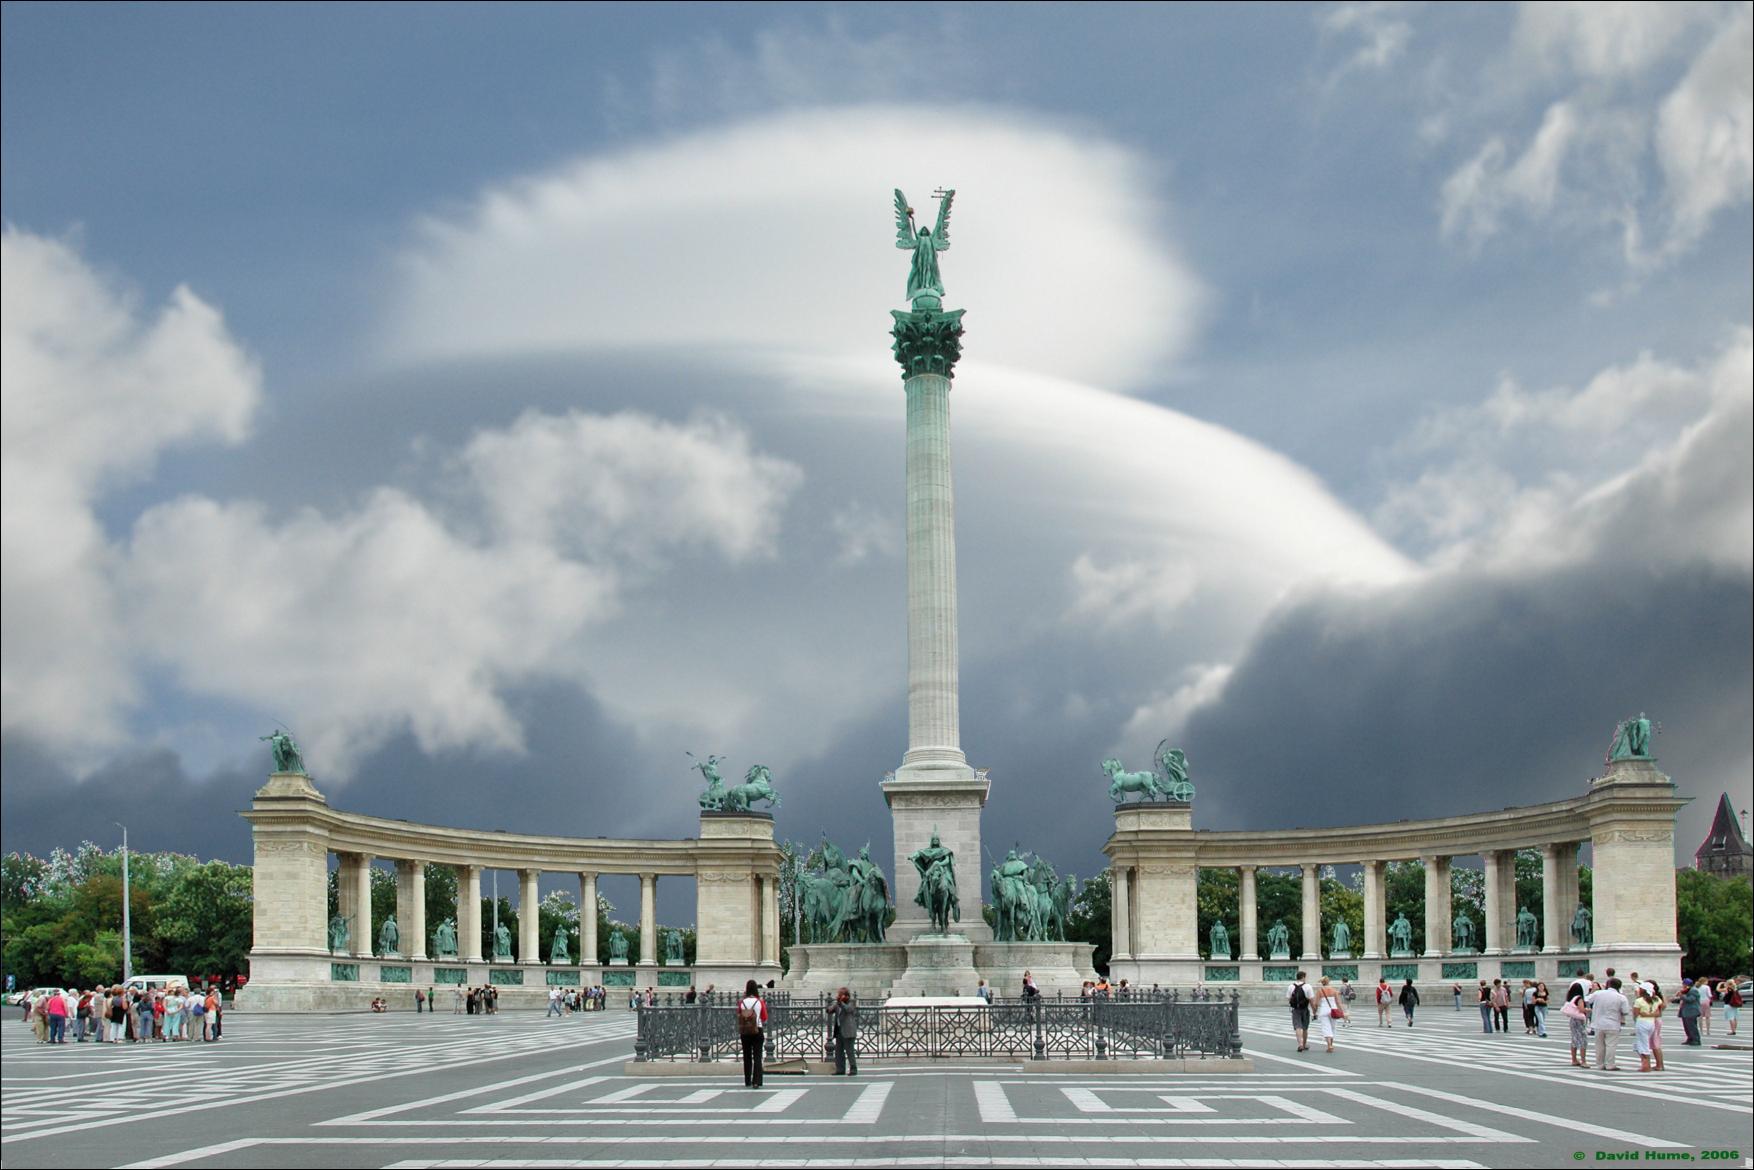 Cover image of this place Heroes Square